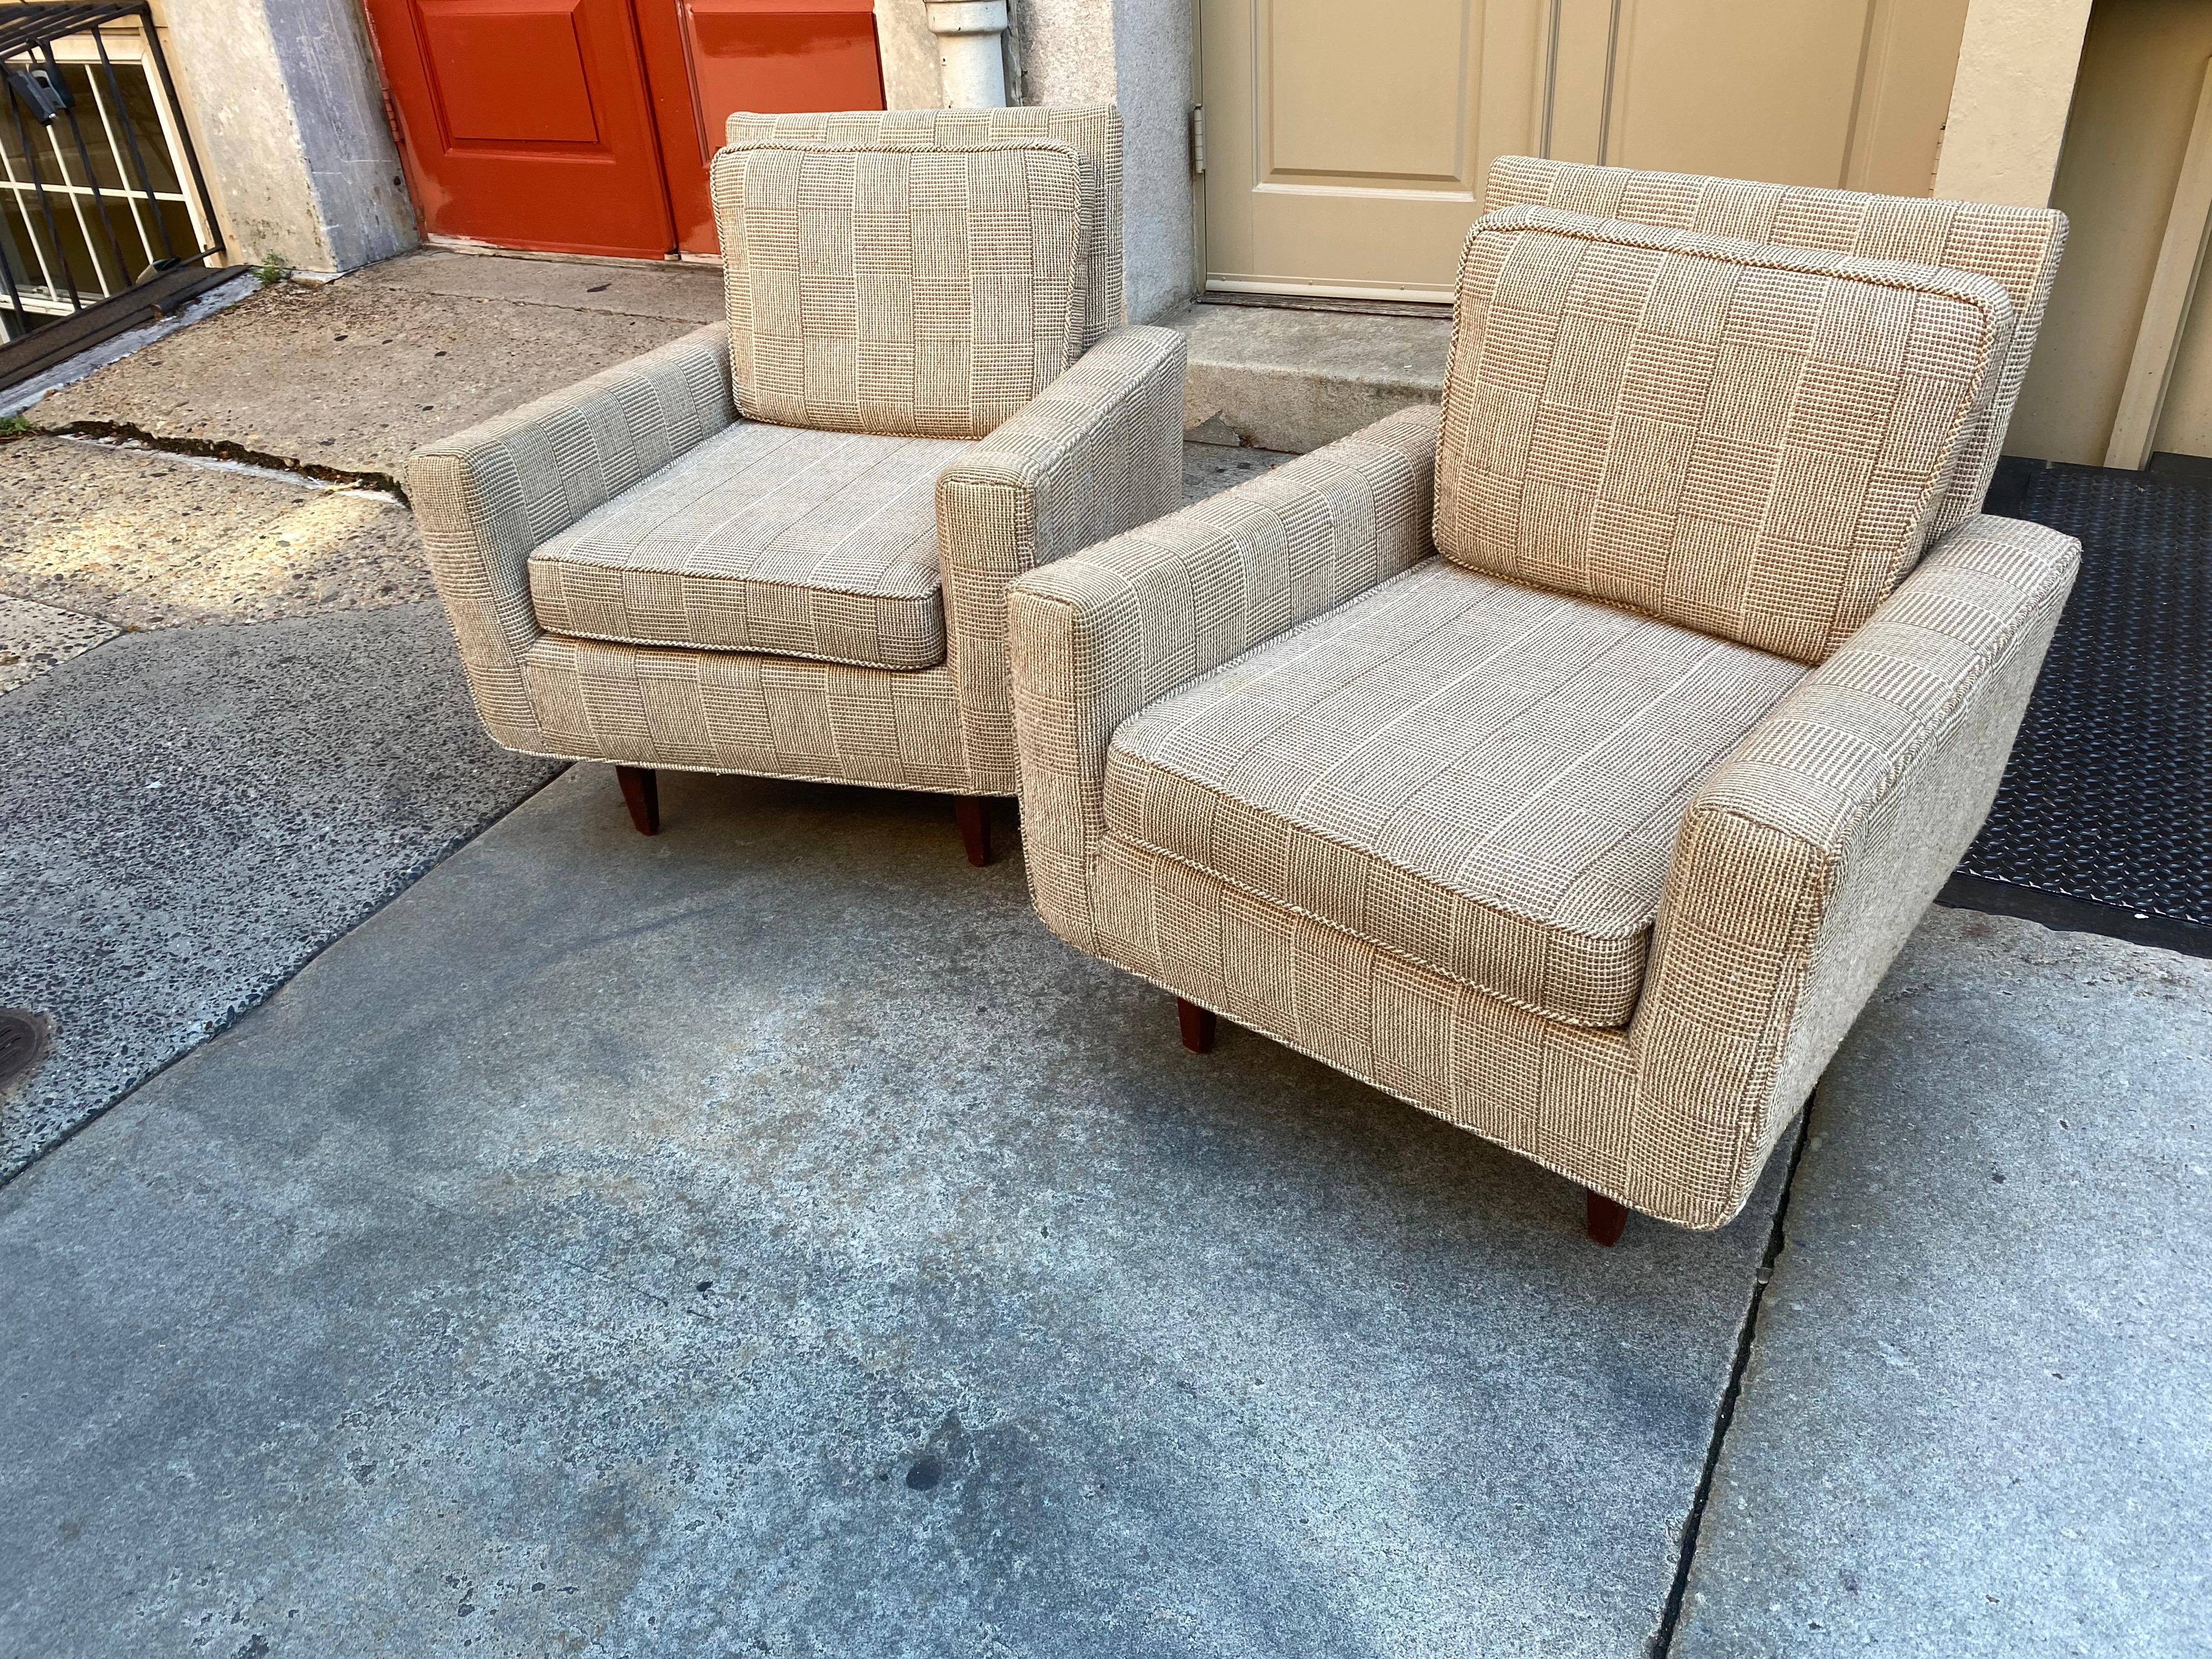 Florence Knoll for Knoll Early armchairs. Original Wool Fabric! New Foam has been replaced on Seat Cushions and Chairs have been Cleaned! Rare to find in Original Condition! Bought from Original Owners almost 20 years ago and then sold to a Local